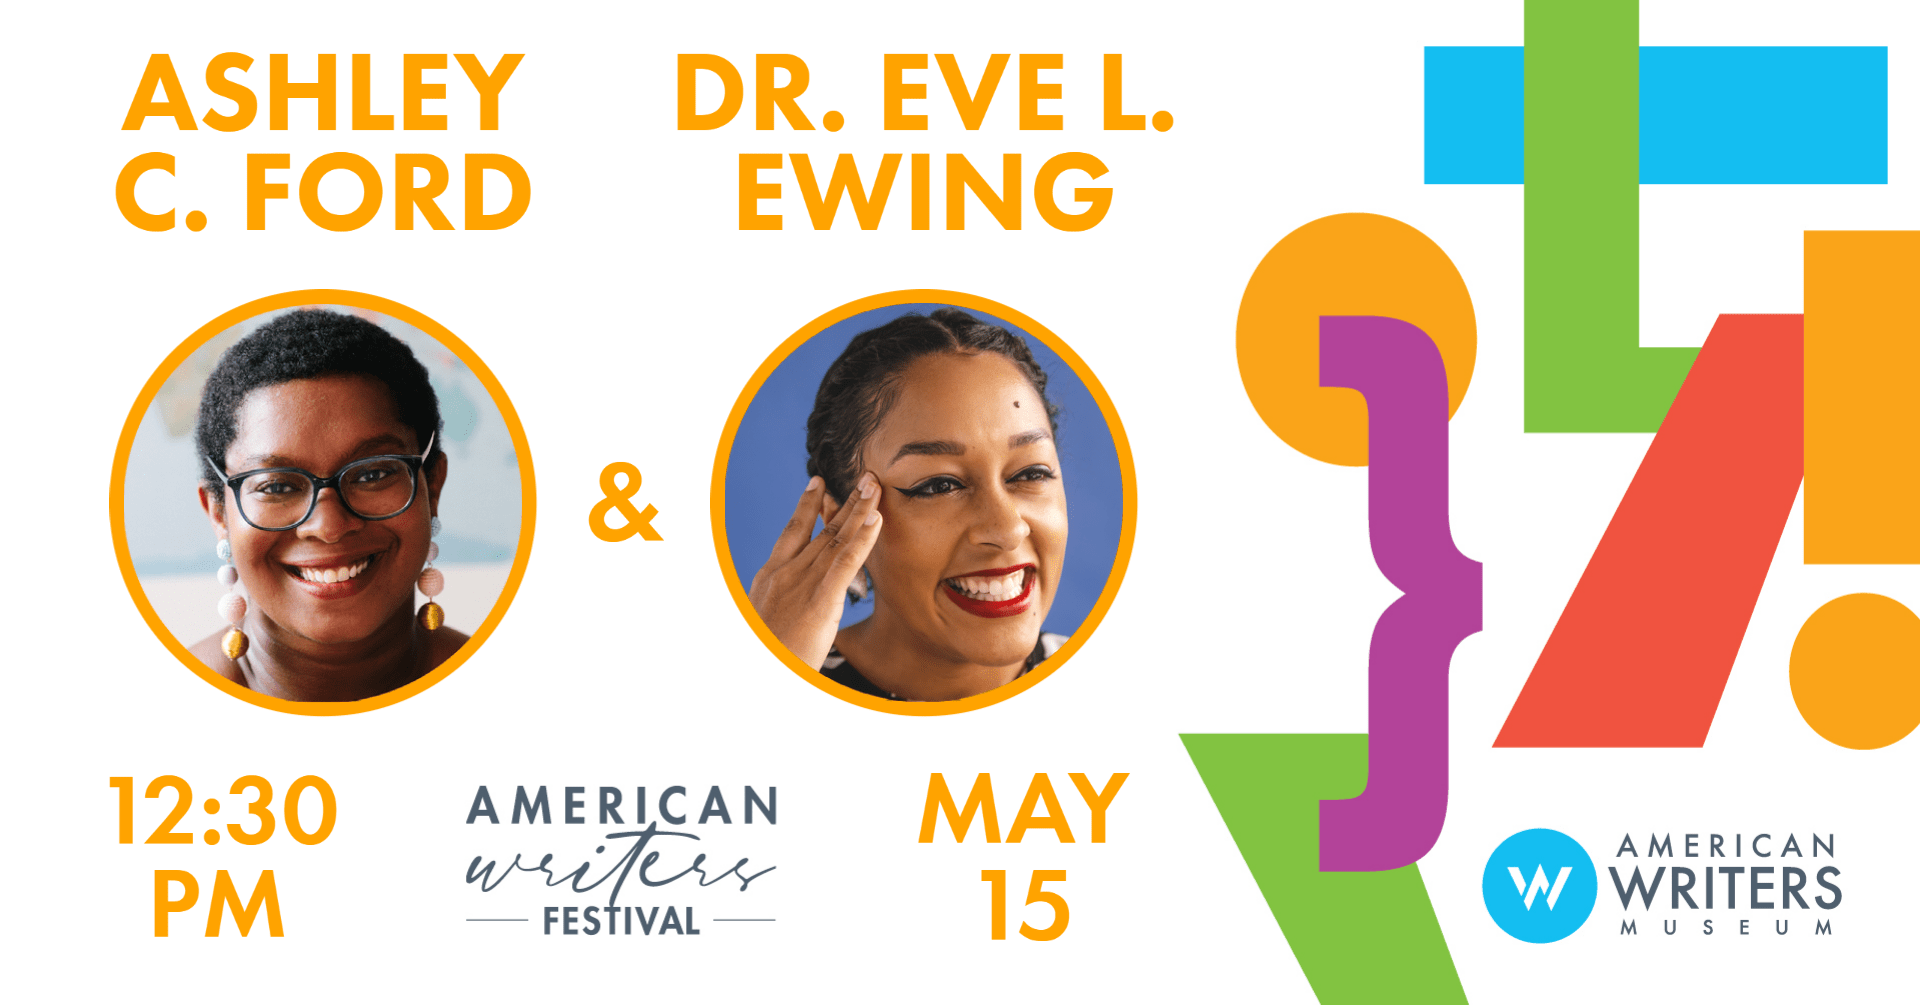 Photos of Ashley C. Ford and Dr. Eve L. Ewing